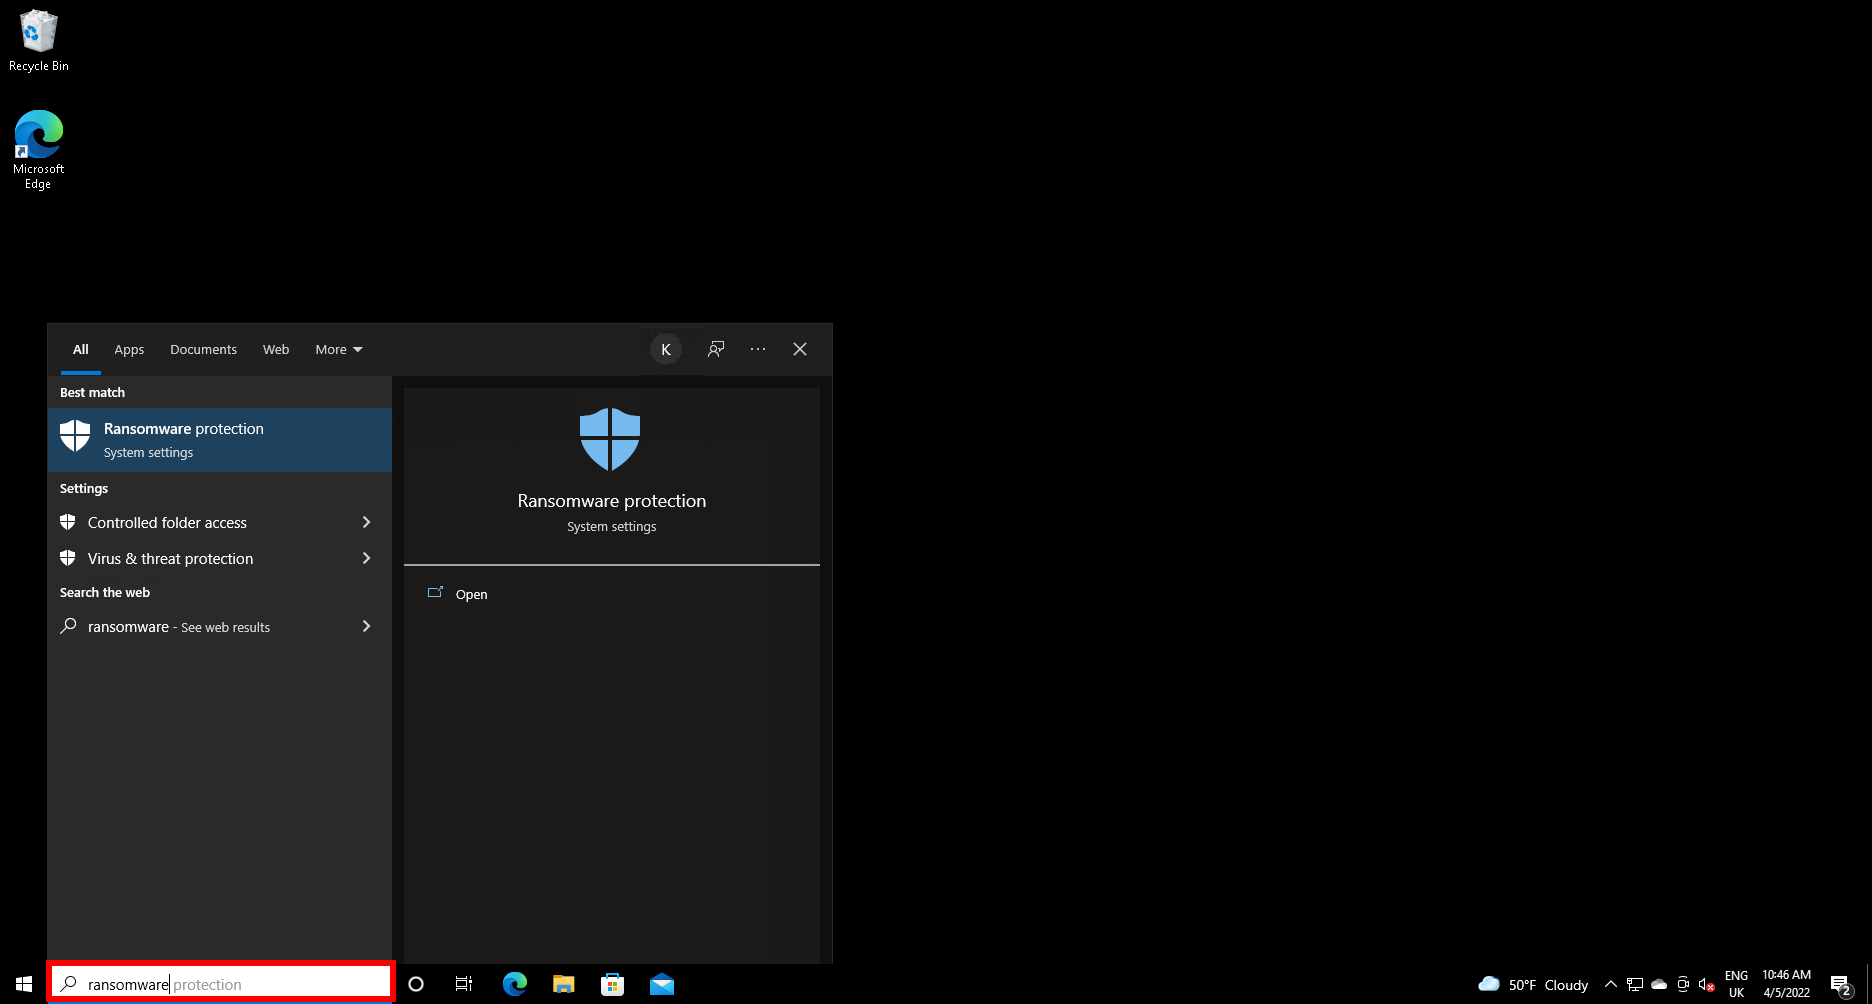 Ransomware is typed into the Windows search bar